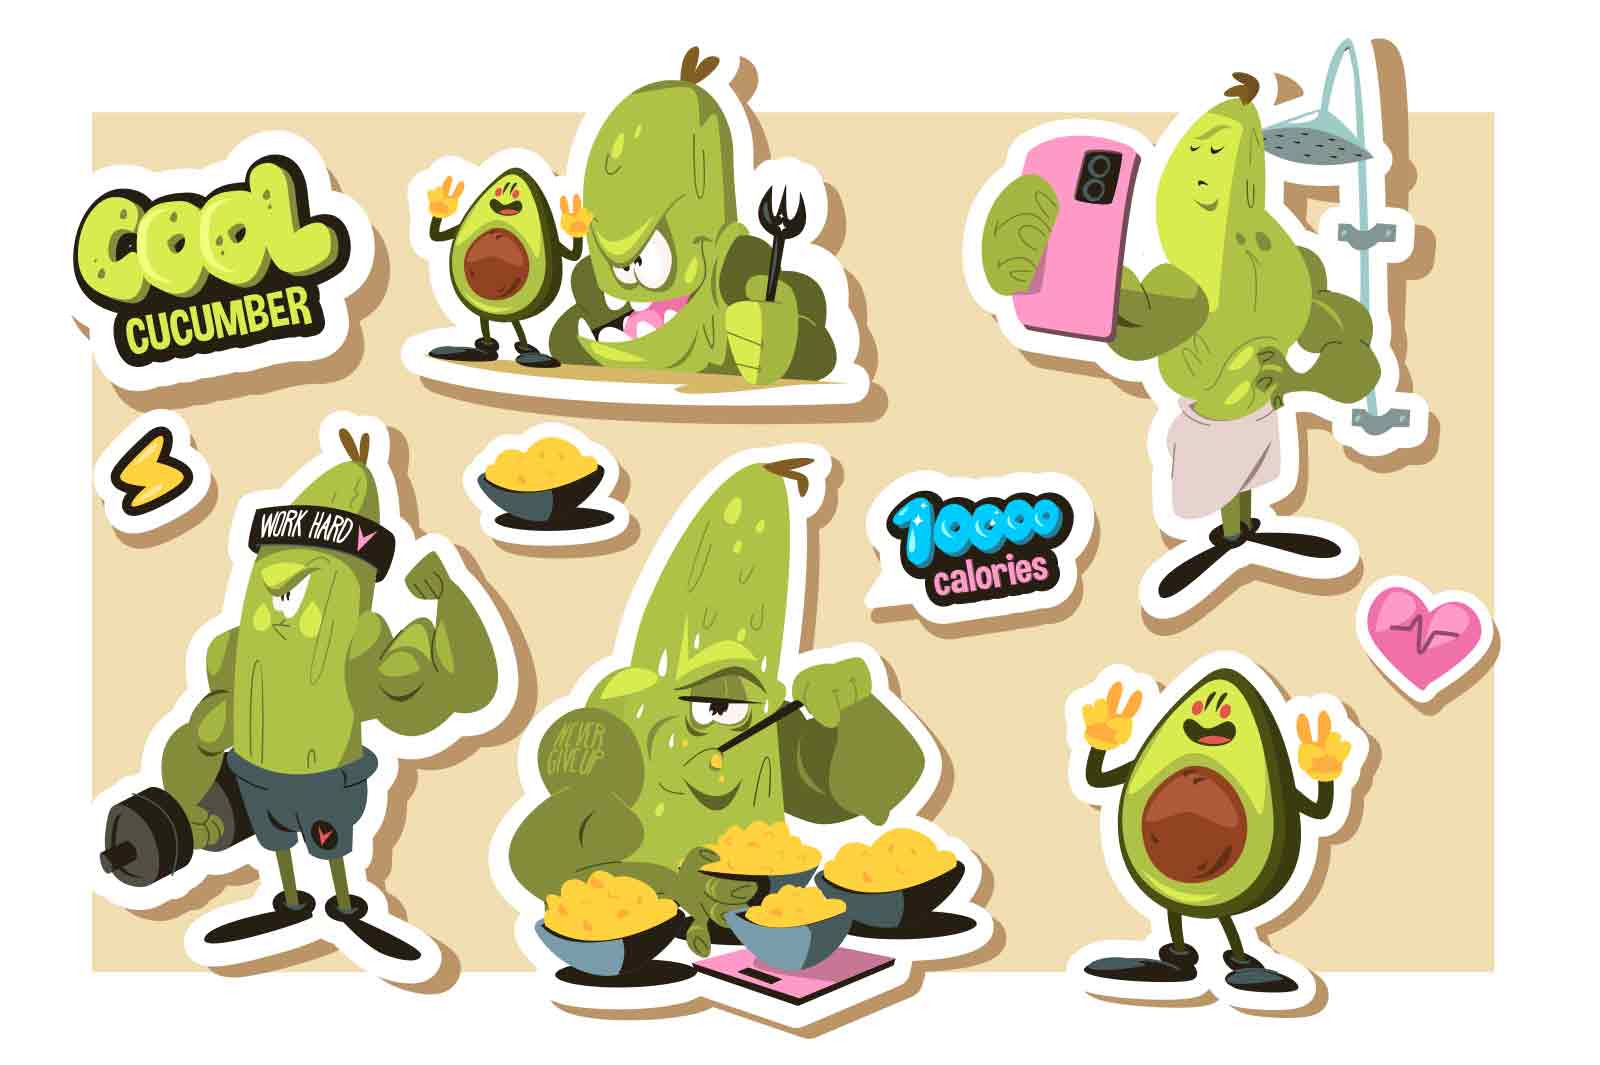 Cool cucumber preview